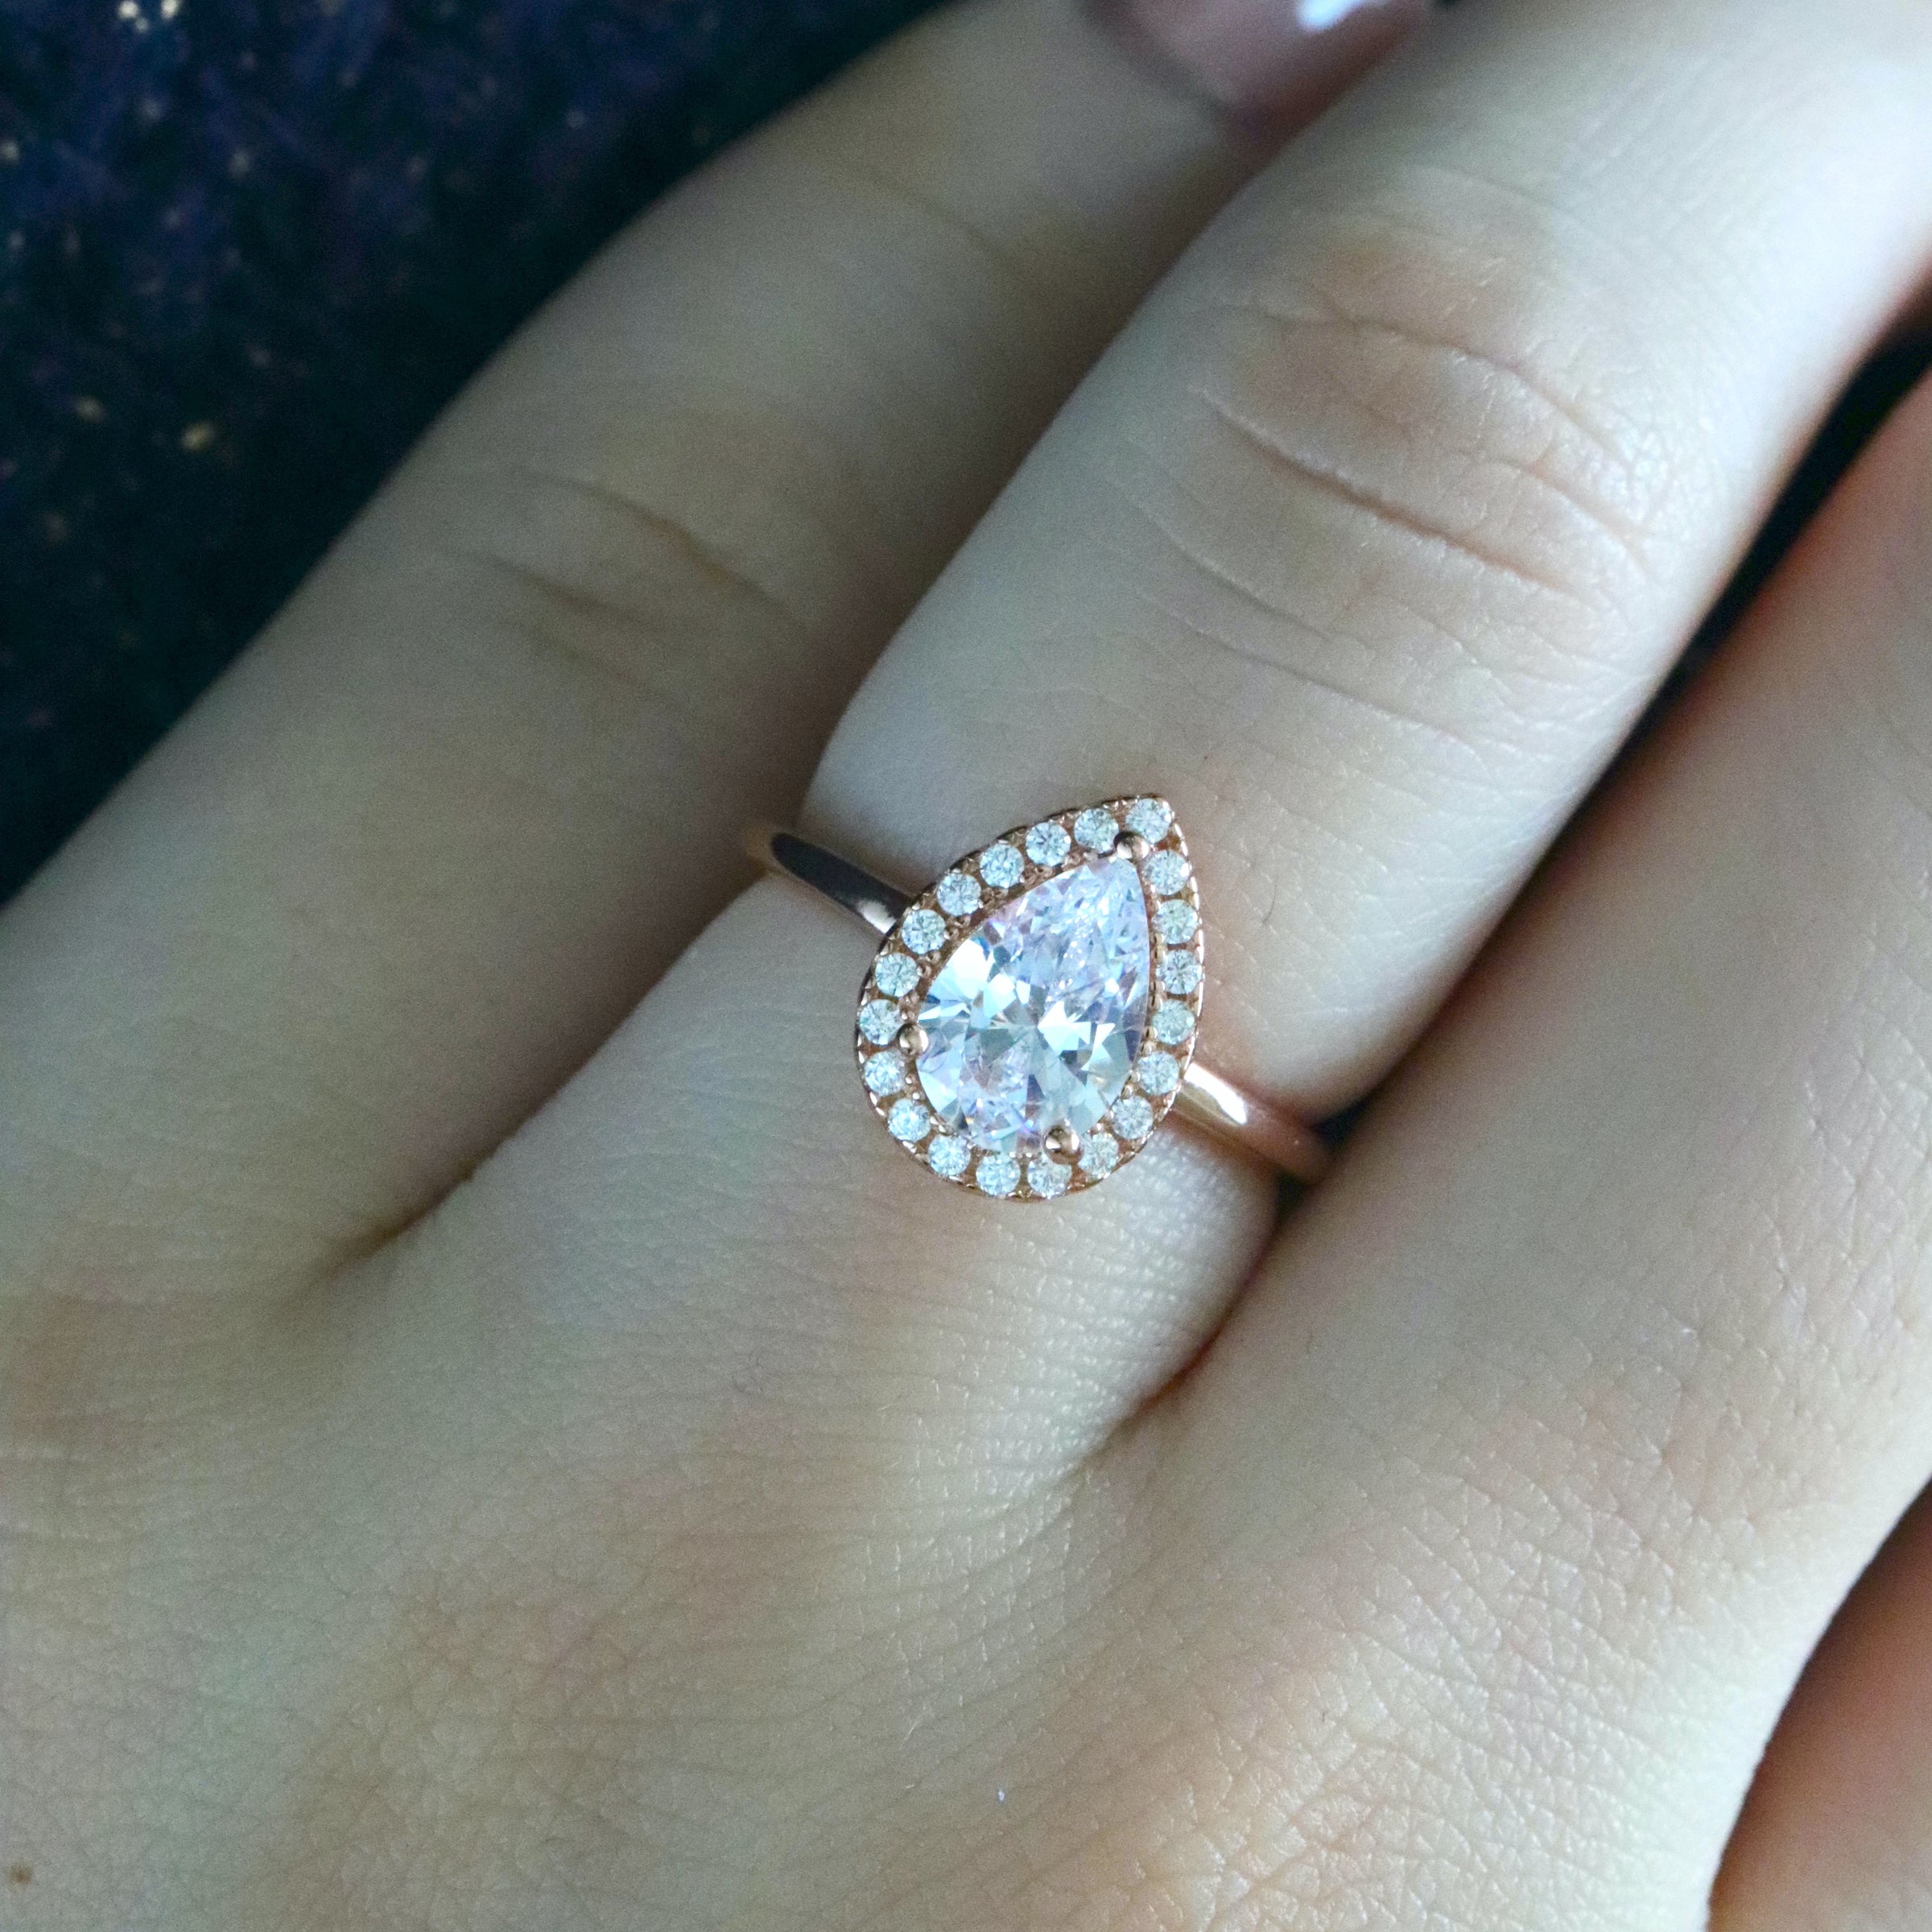 1.5 ctw Oval Halo Engagement Ring - Rose Gold 9